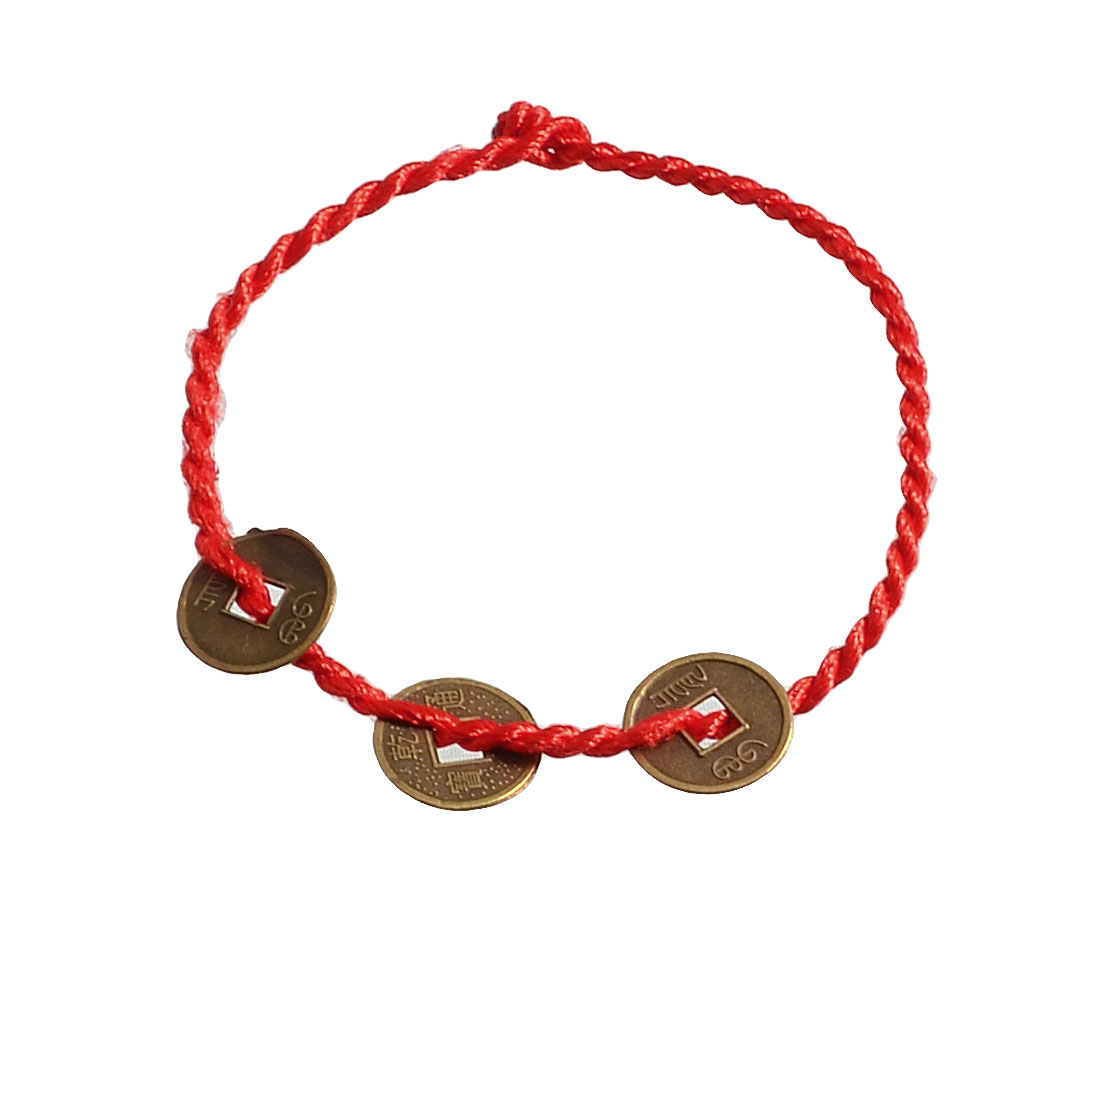 Unique Bargains Handcrafted Copper Coin Decor Red Nylon String Bracelet Ankle Chain